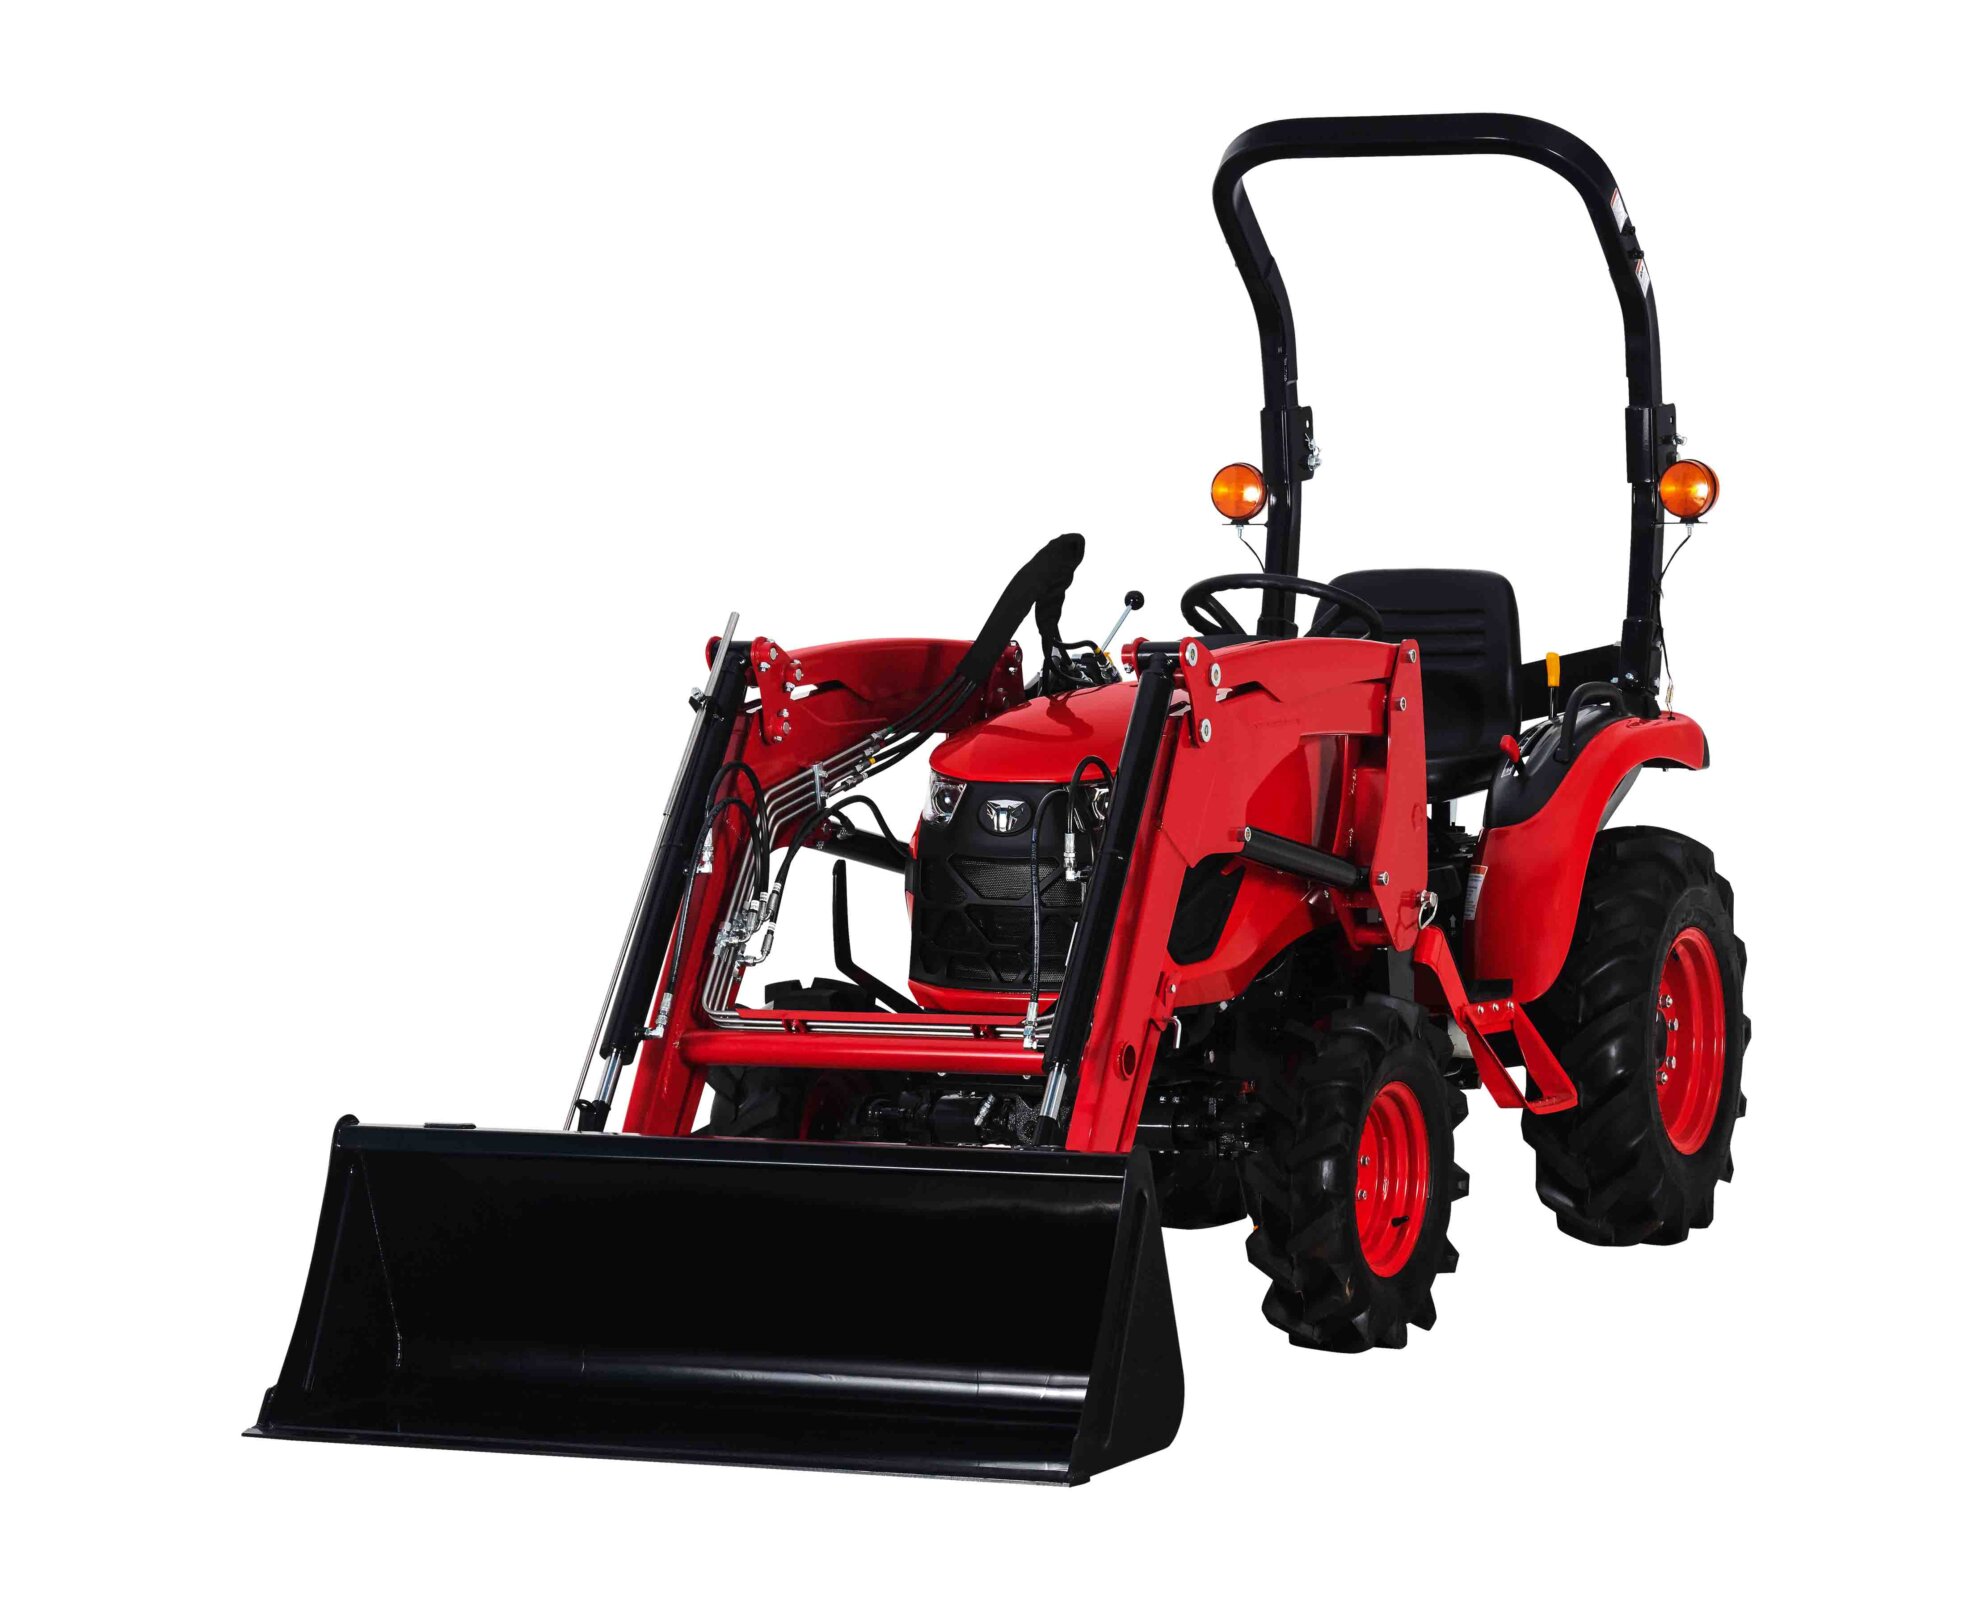 Tym/Branson compact tractor model 2500HL (Hydr. drive)